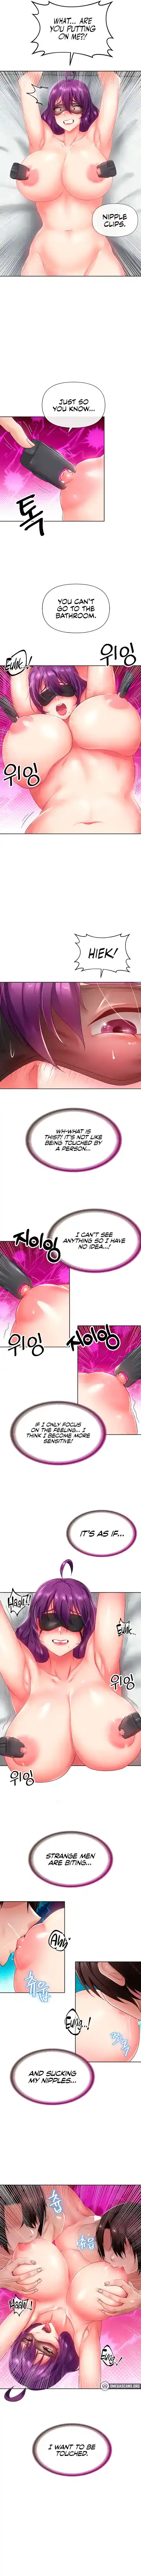 Welcome to the Isekai Convenience Store Fhentai.net - Page 92